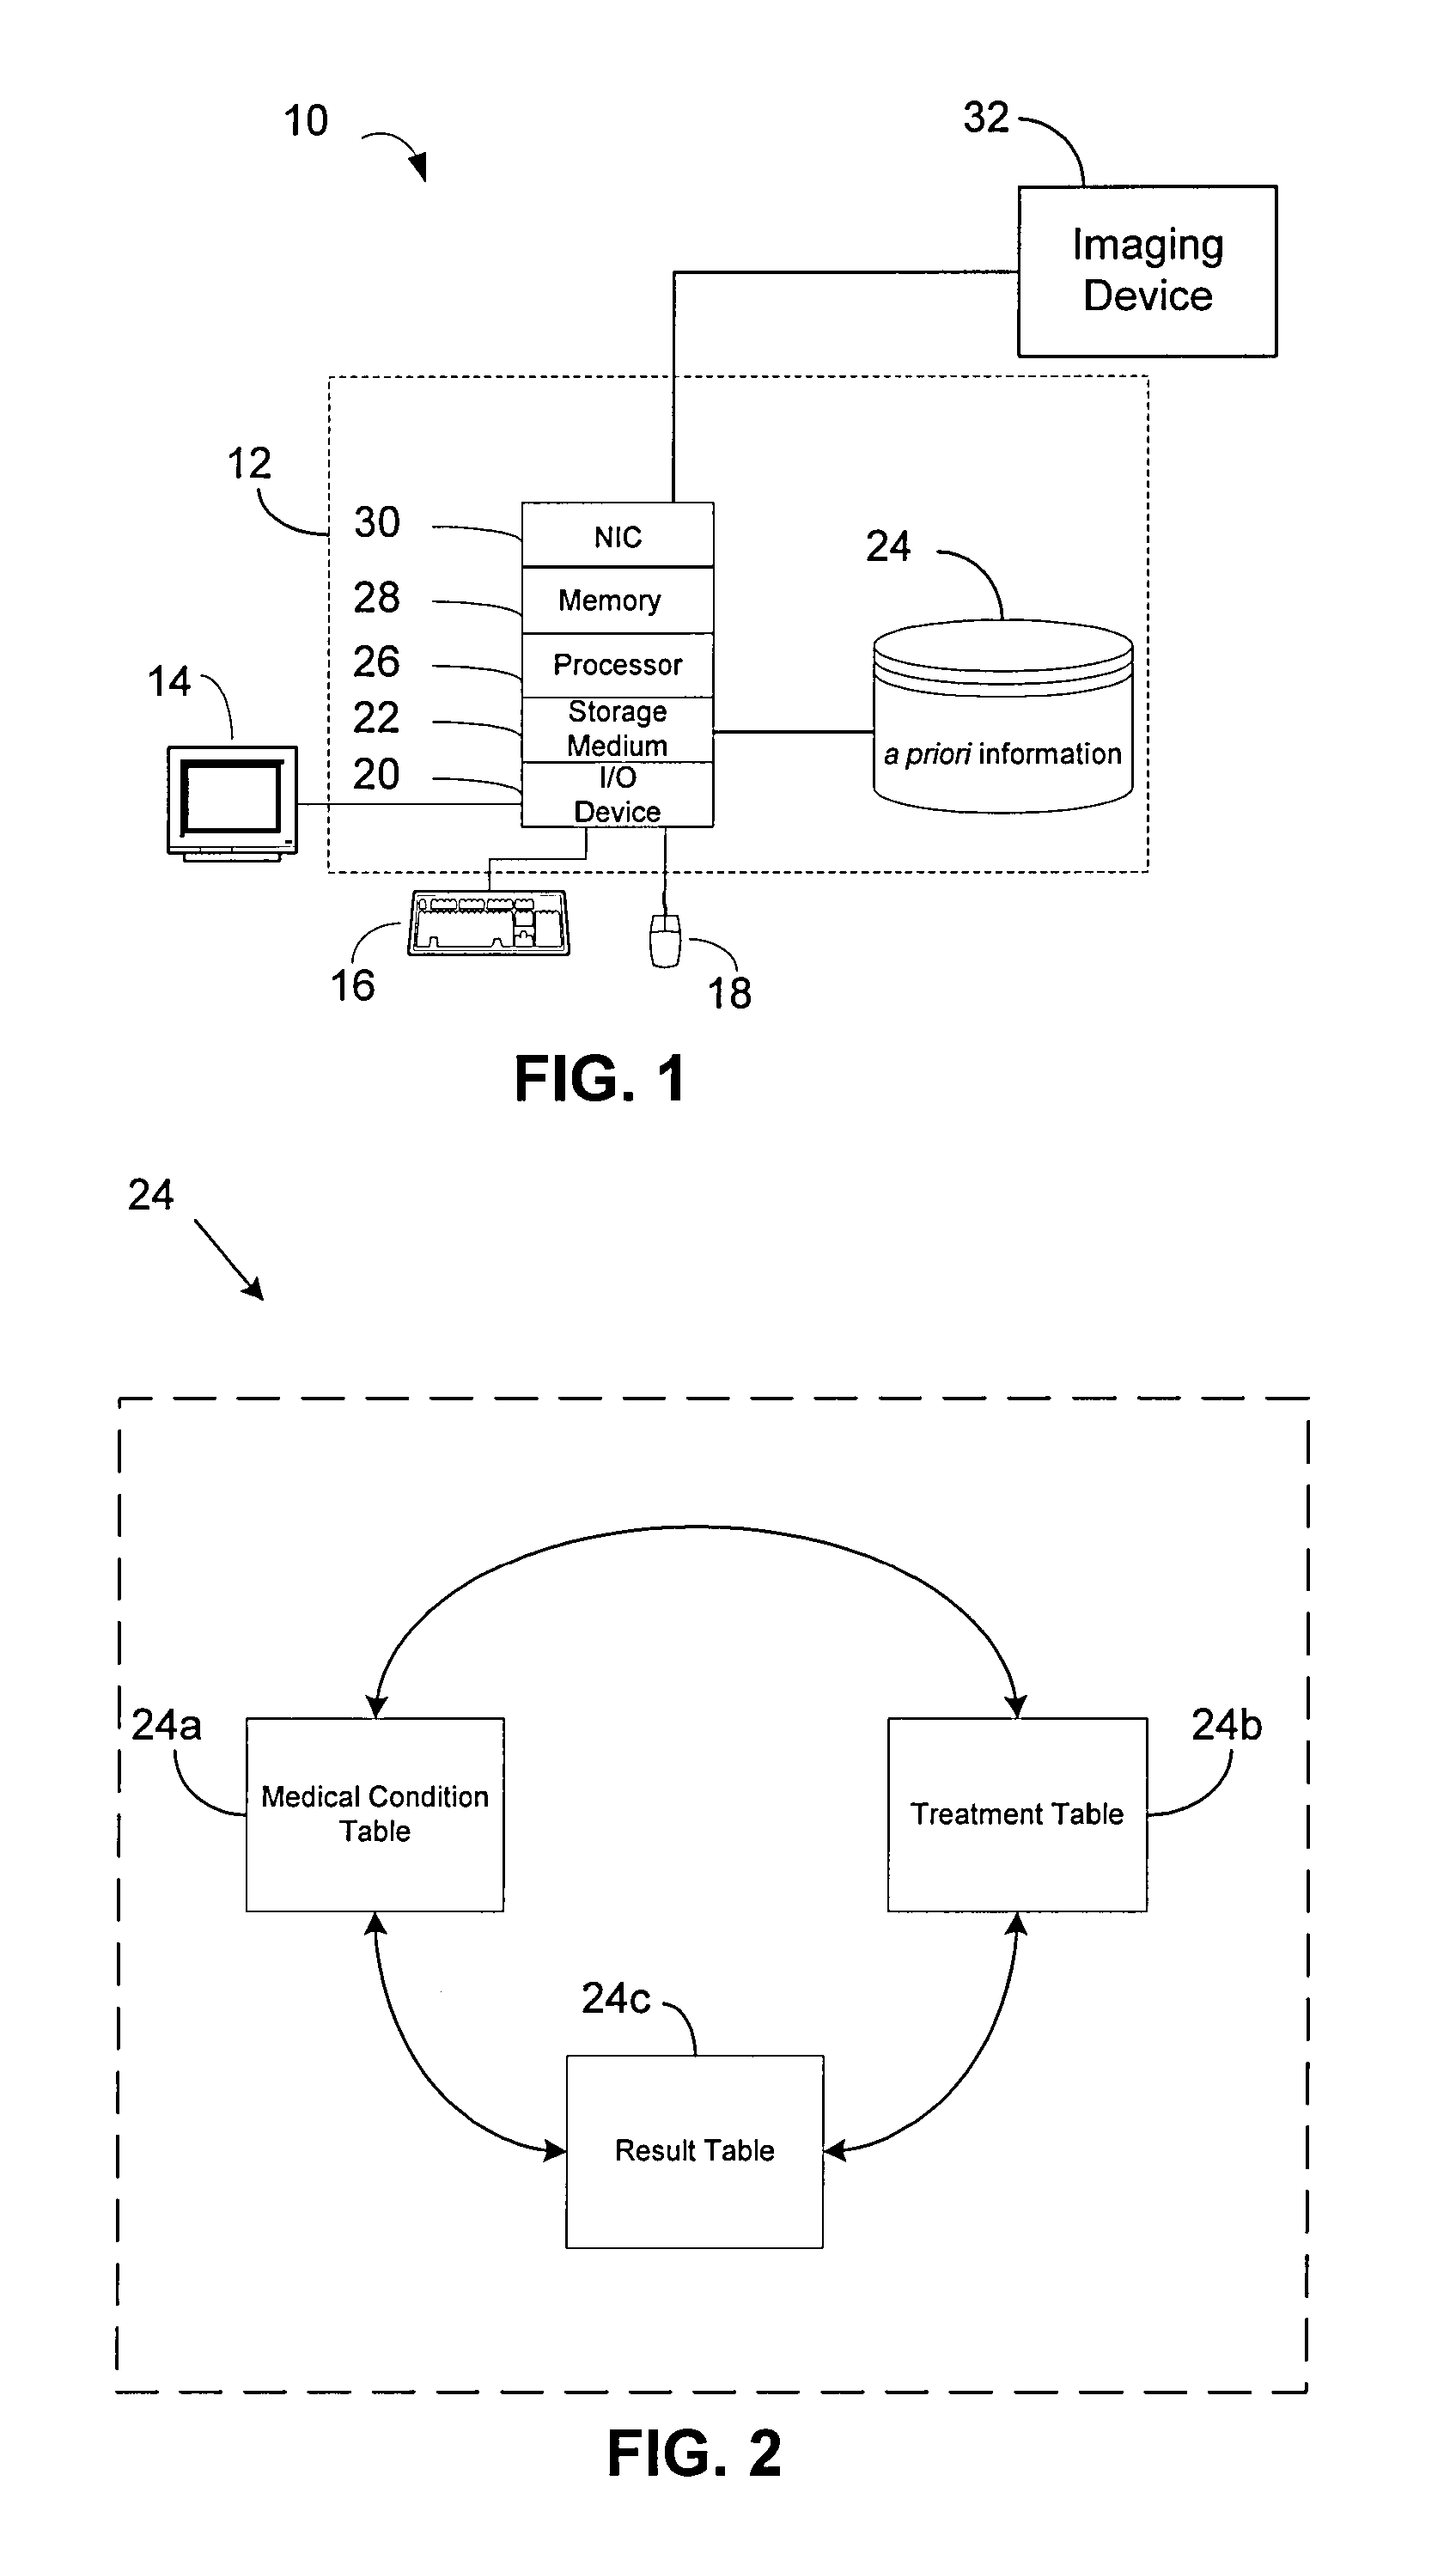 Integrated treatment planning system